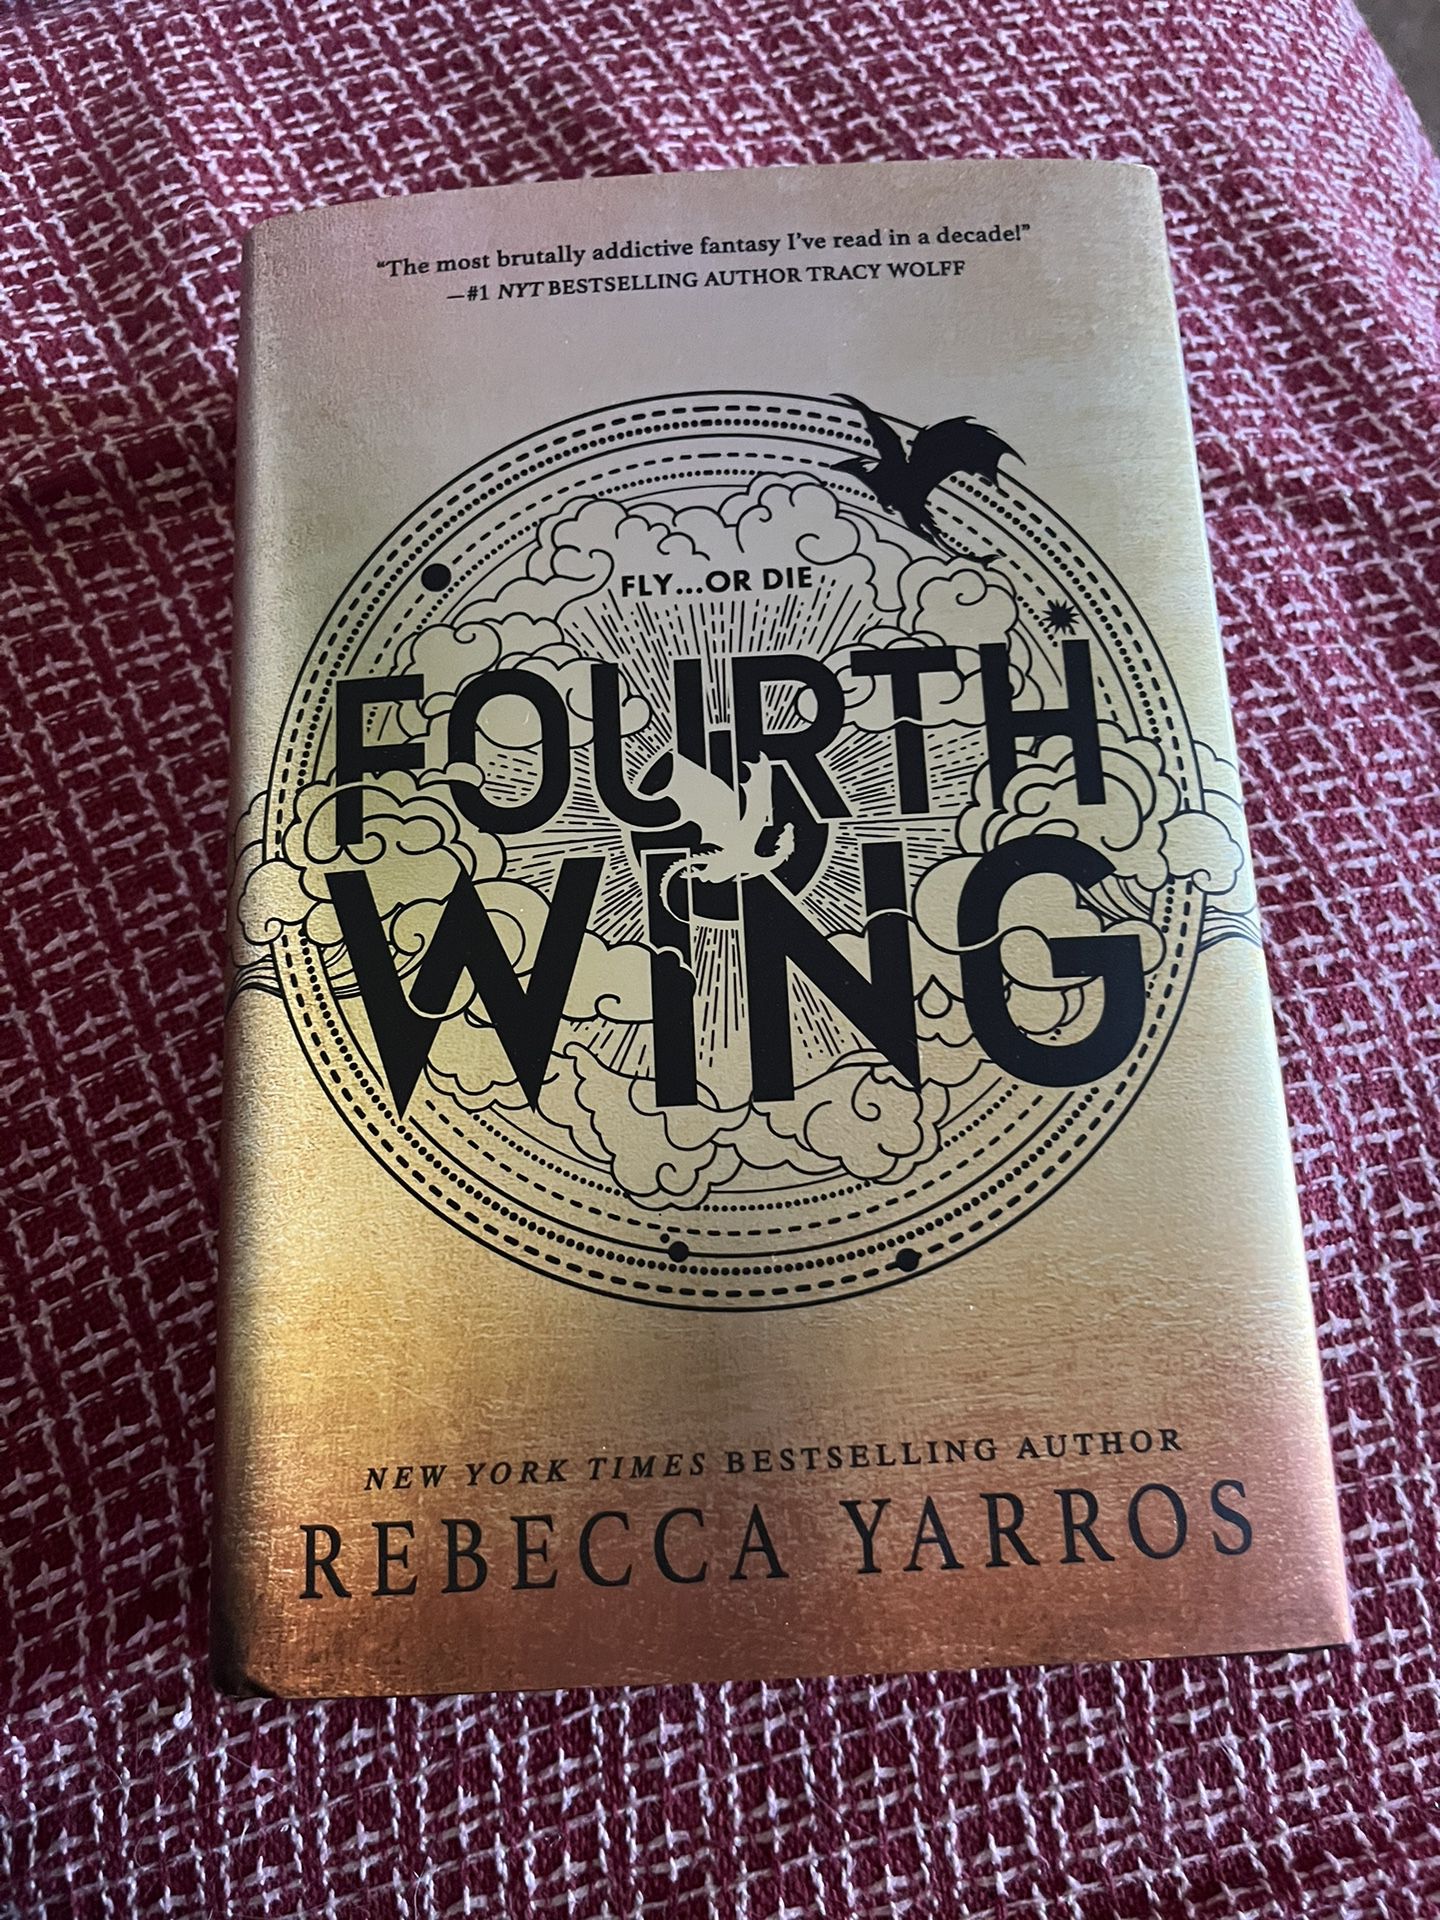 Fourth Wing Book